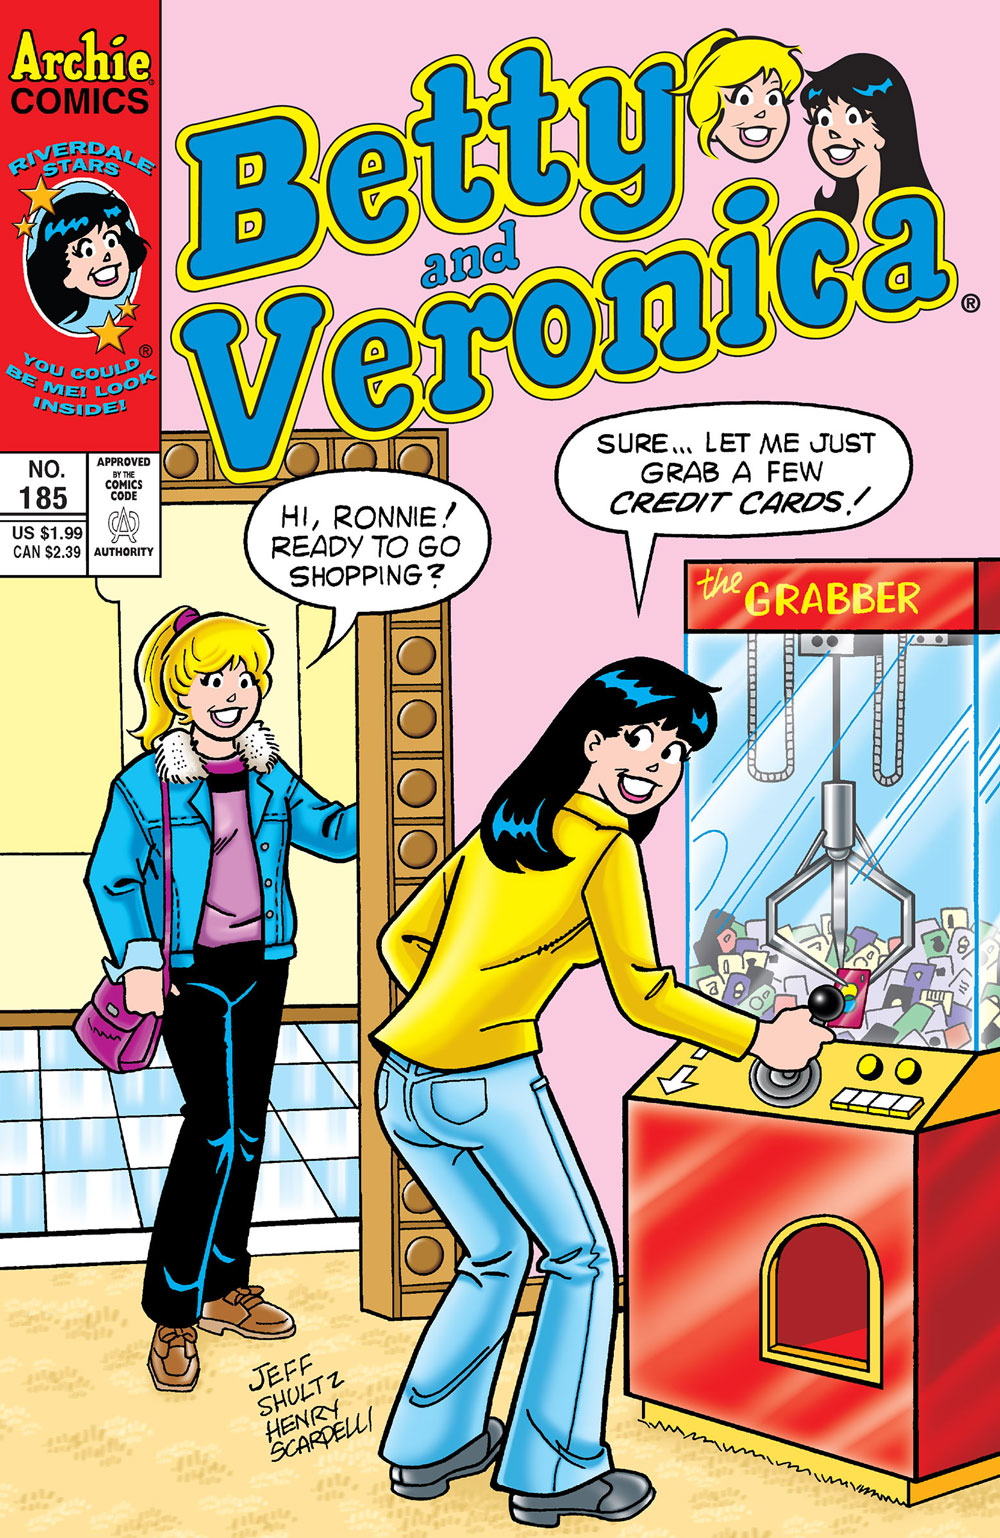 Betty and Veronica are in Veronica's game room. Betty is dressed to go out, and Veronica is playing with a grabber claw machine full of credit cards. Betty asks if she's ready to go shopping and Veronica says yes, she just has to grab a few credit cards first.